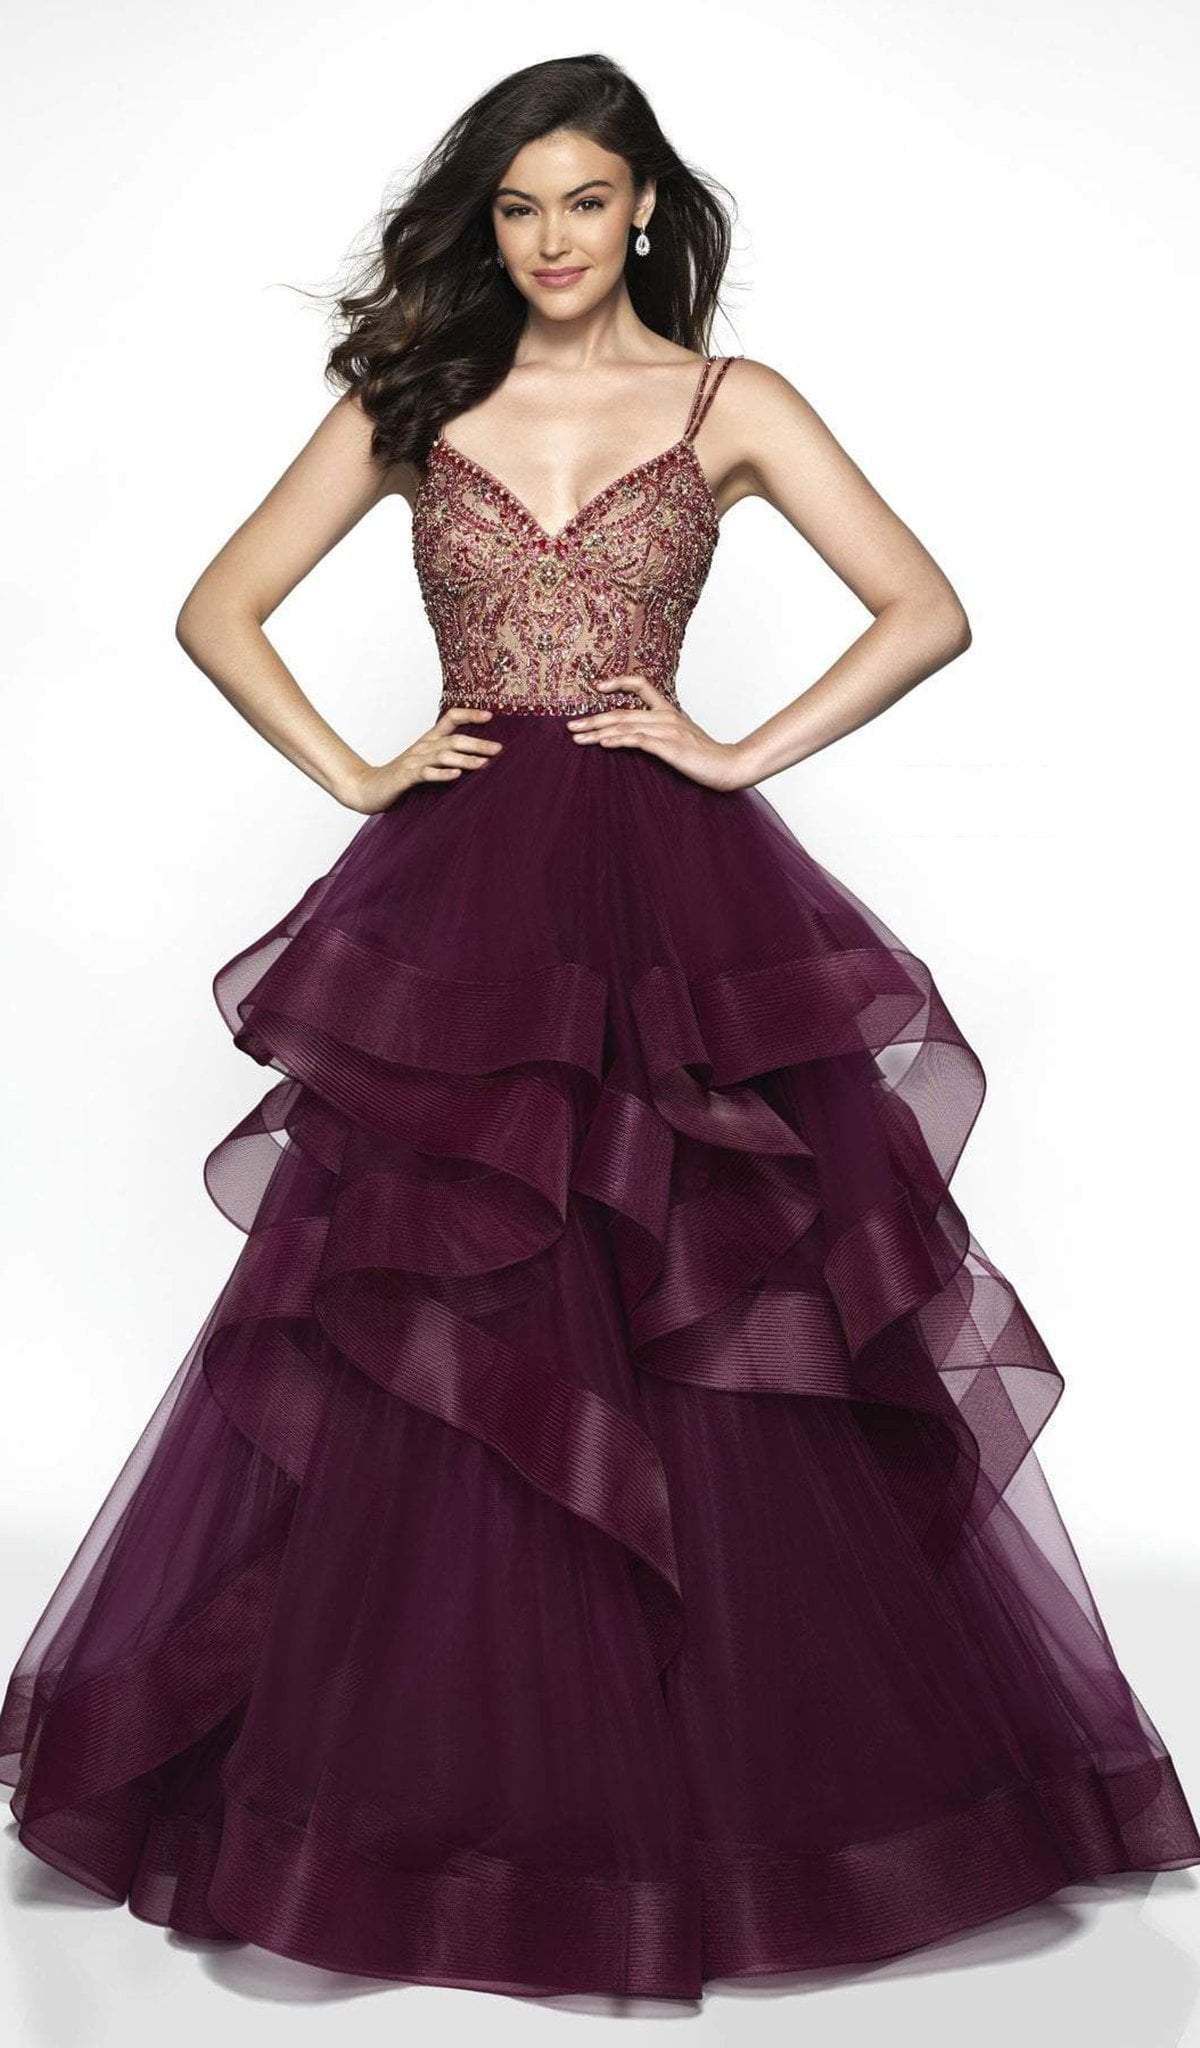 Blush by Alexia Designs - C2007 Beaded V-neck Ruffled Tulle Ballgown In Red and Neutral